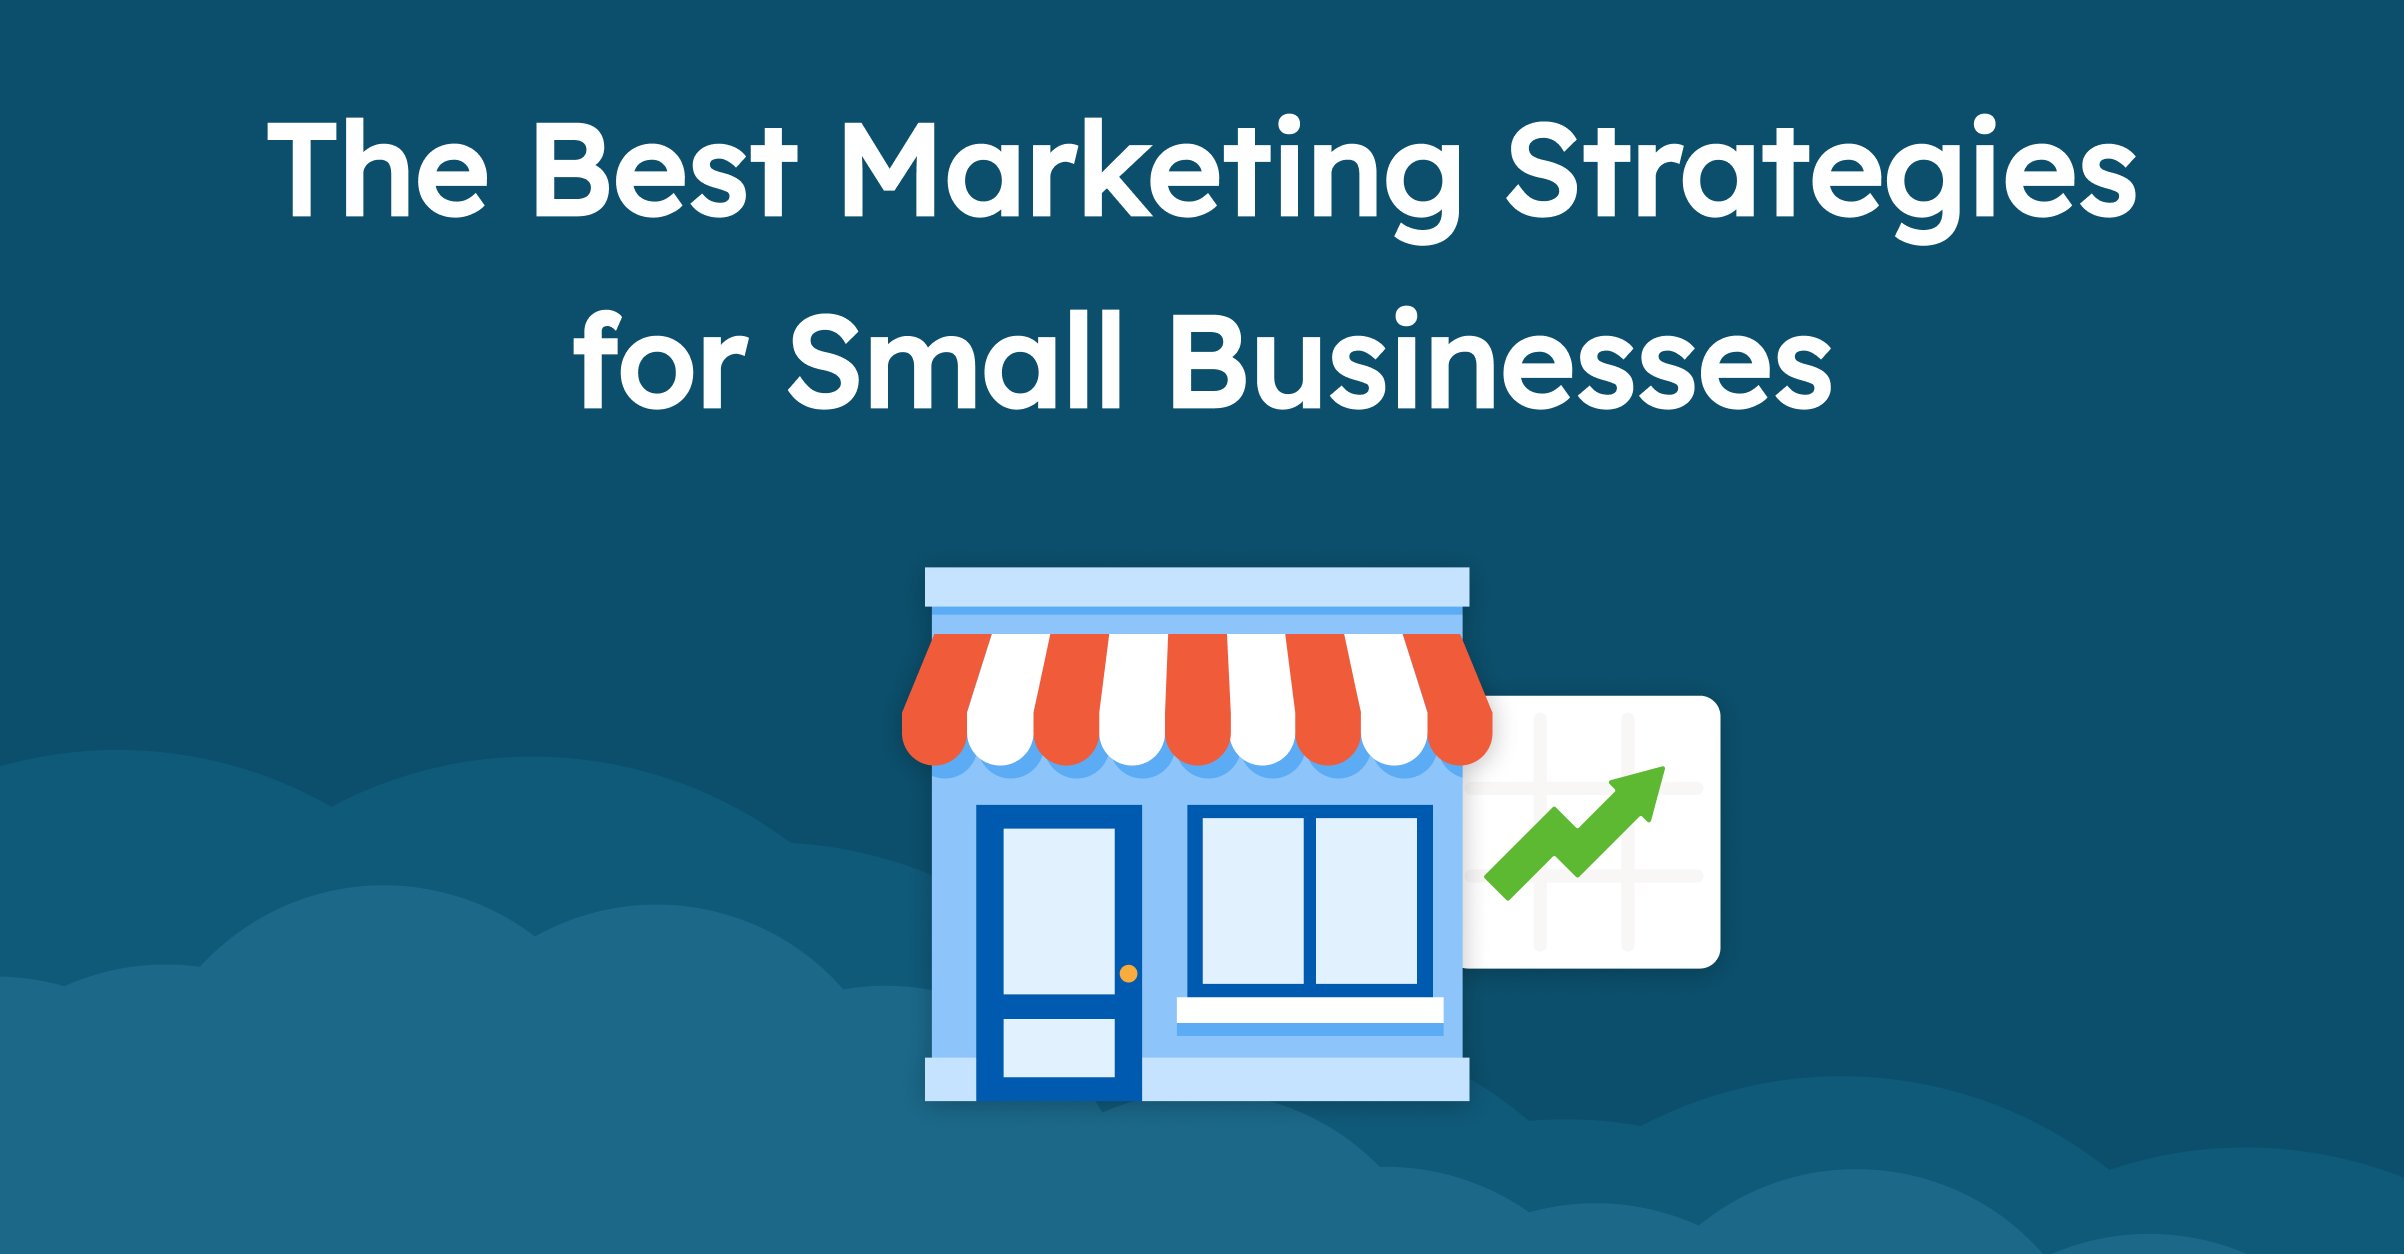 The Best Marketing Strategies for Small Businesses